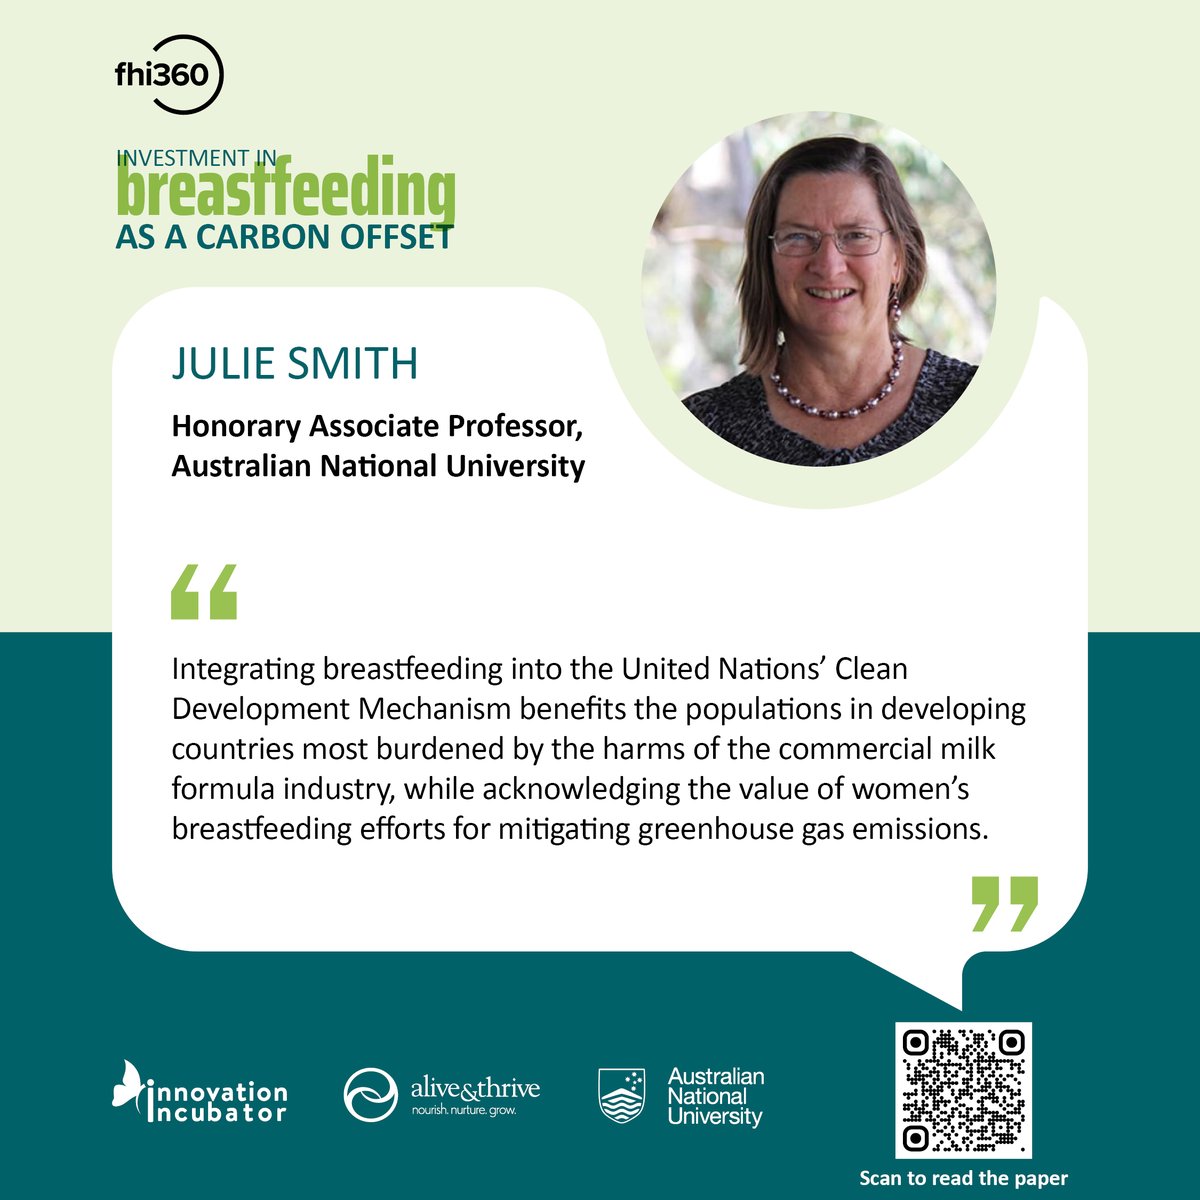 “Integrating breastfeeding into the UNs’ CDM benefits the populations in developing countries ... while acknowledging the value of women’s #breastfeeding efforts for mitigating greenhouse gas emissions.” @JuliePSmith1 bit.ly/Breastfeedinga… #BreastfeedingasCarbonOffset